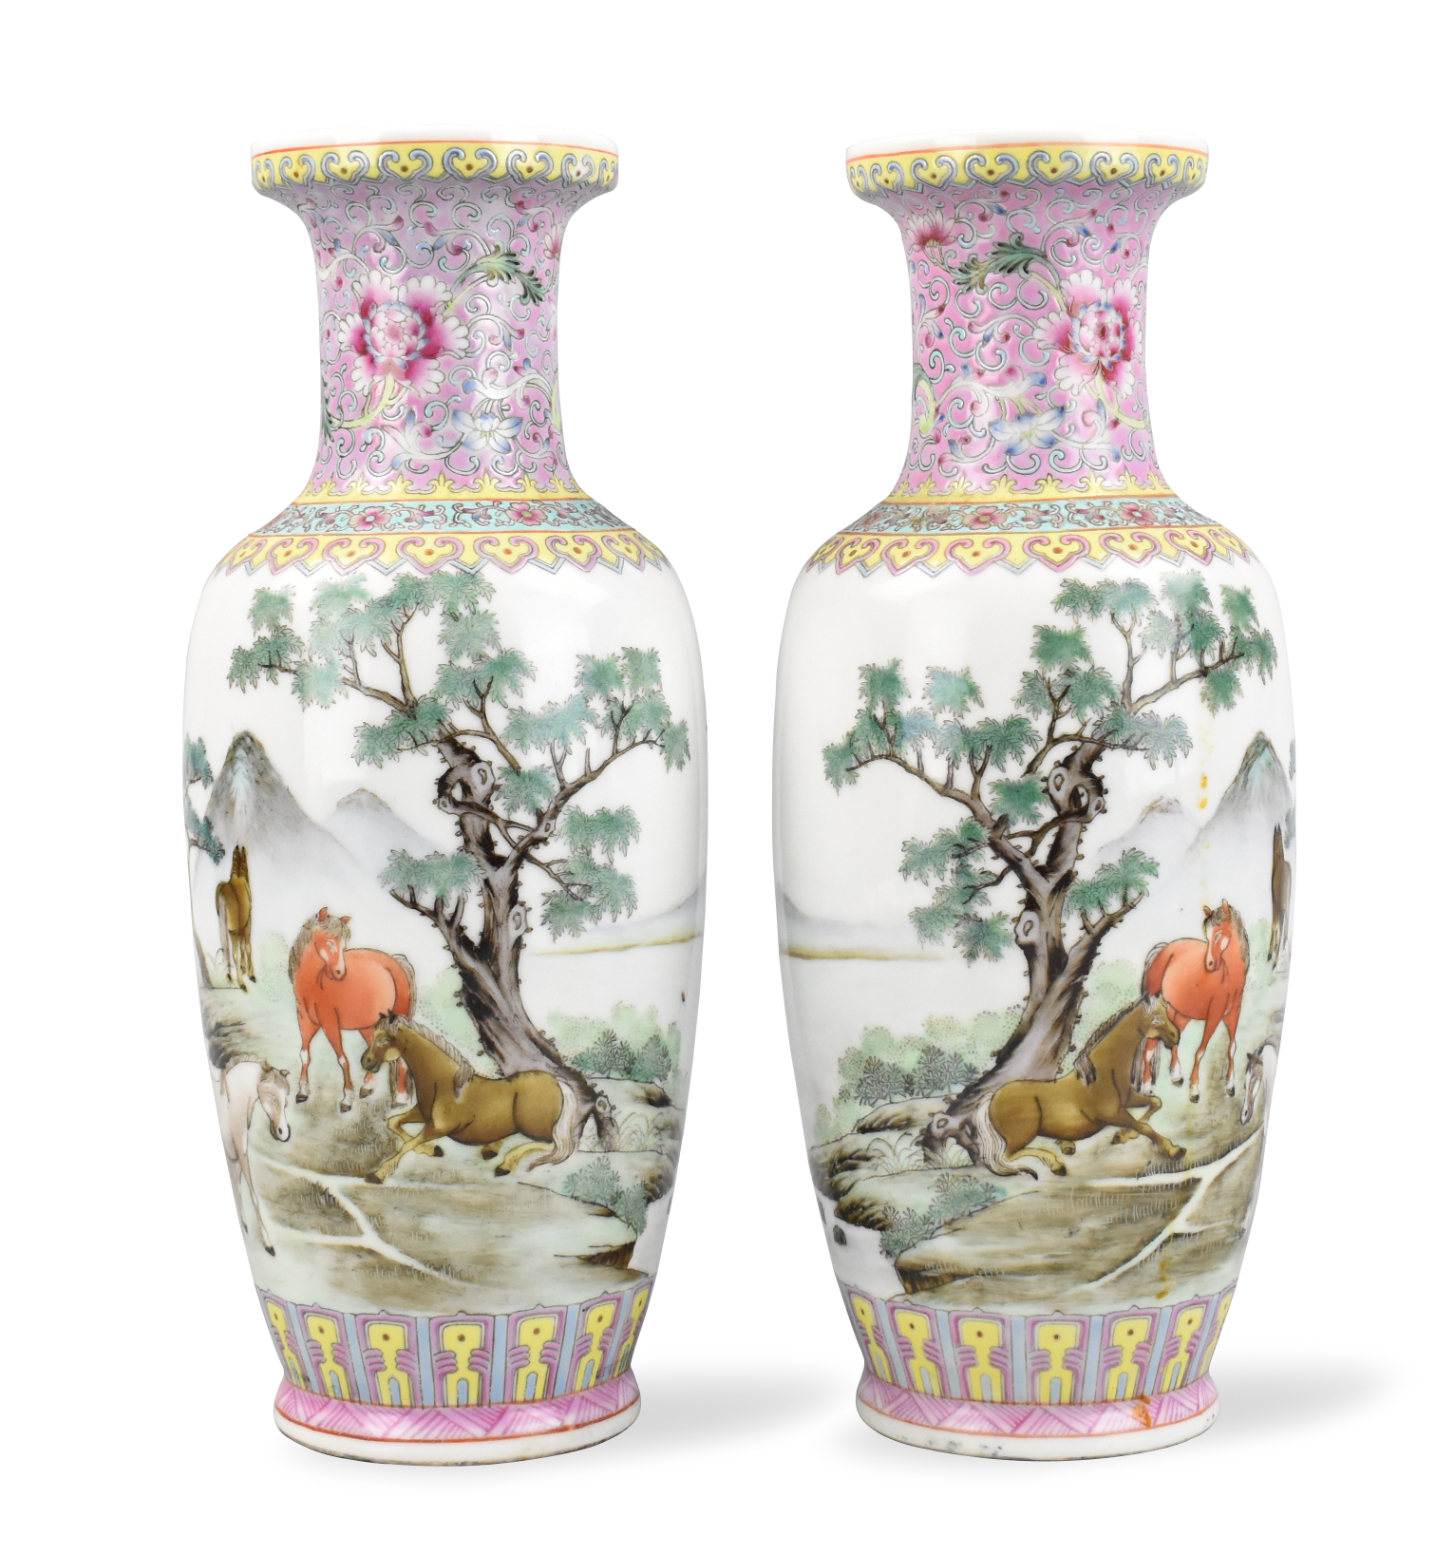 PAIR OF CHINESE FAMILLE ROSE VASES 339a26